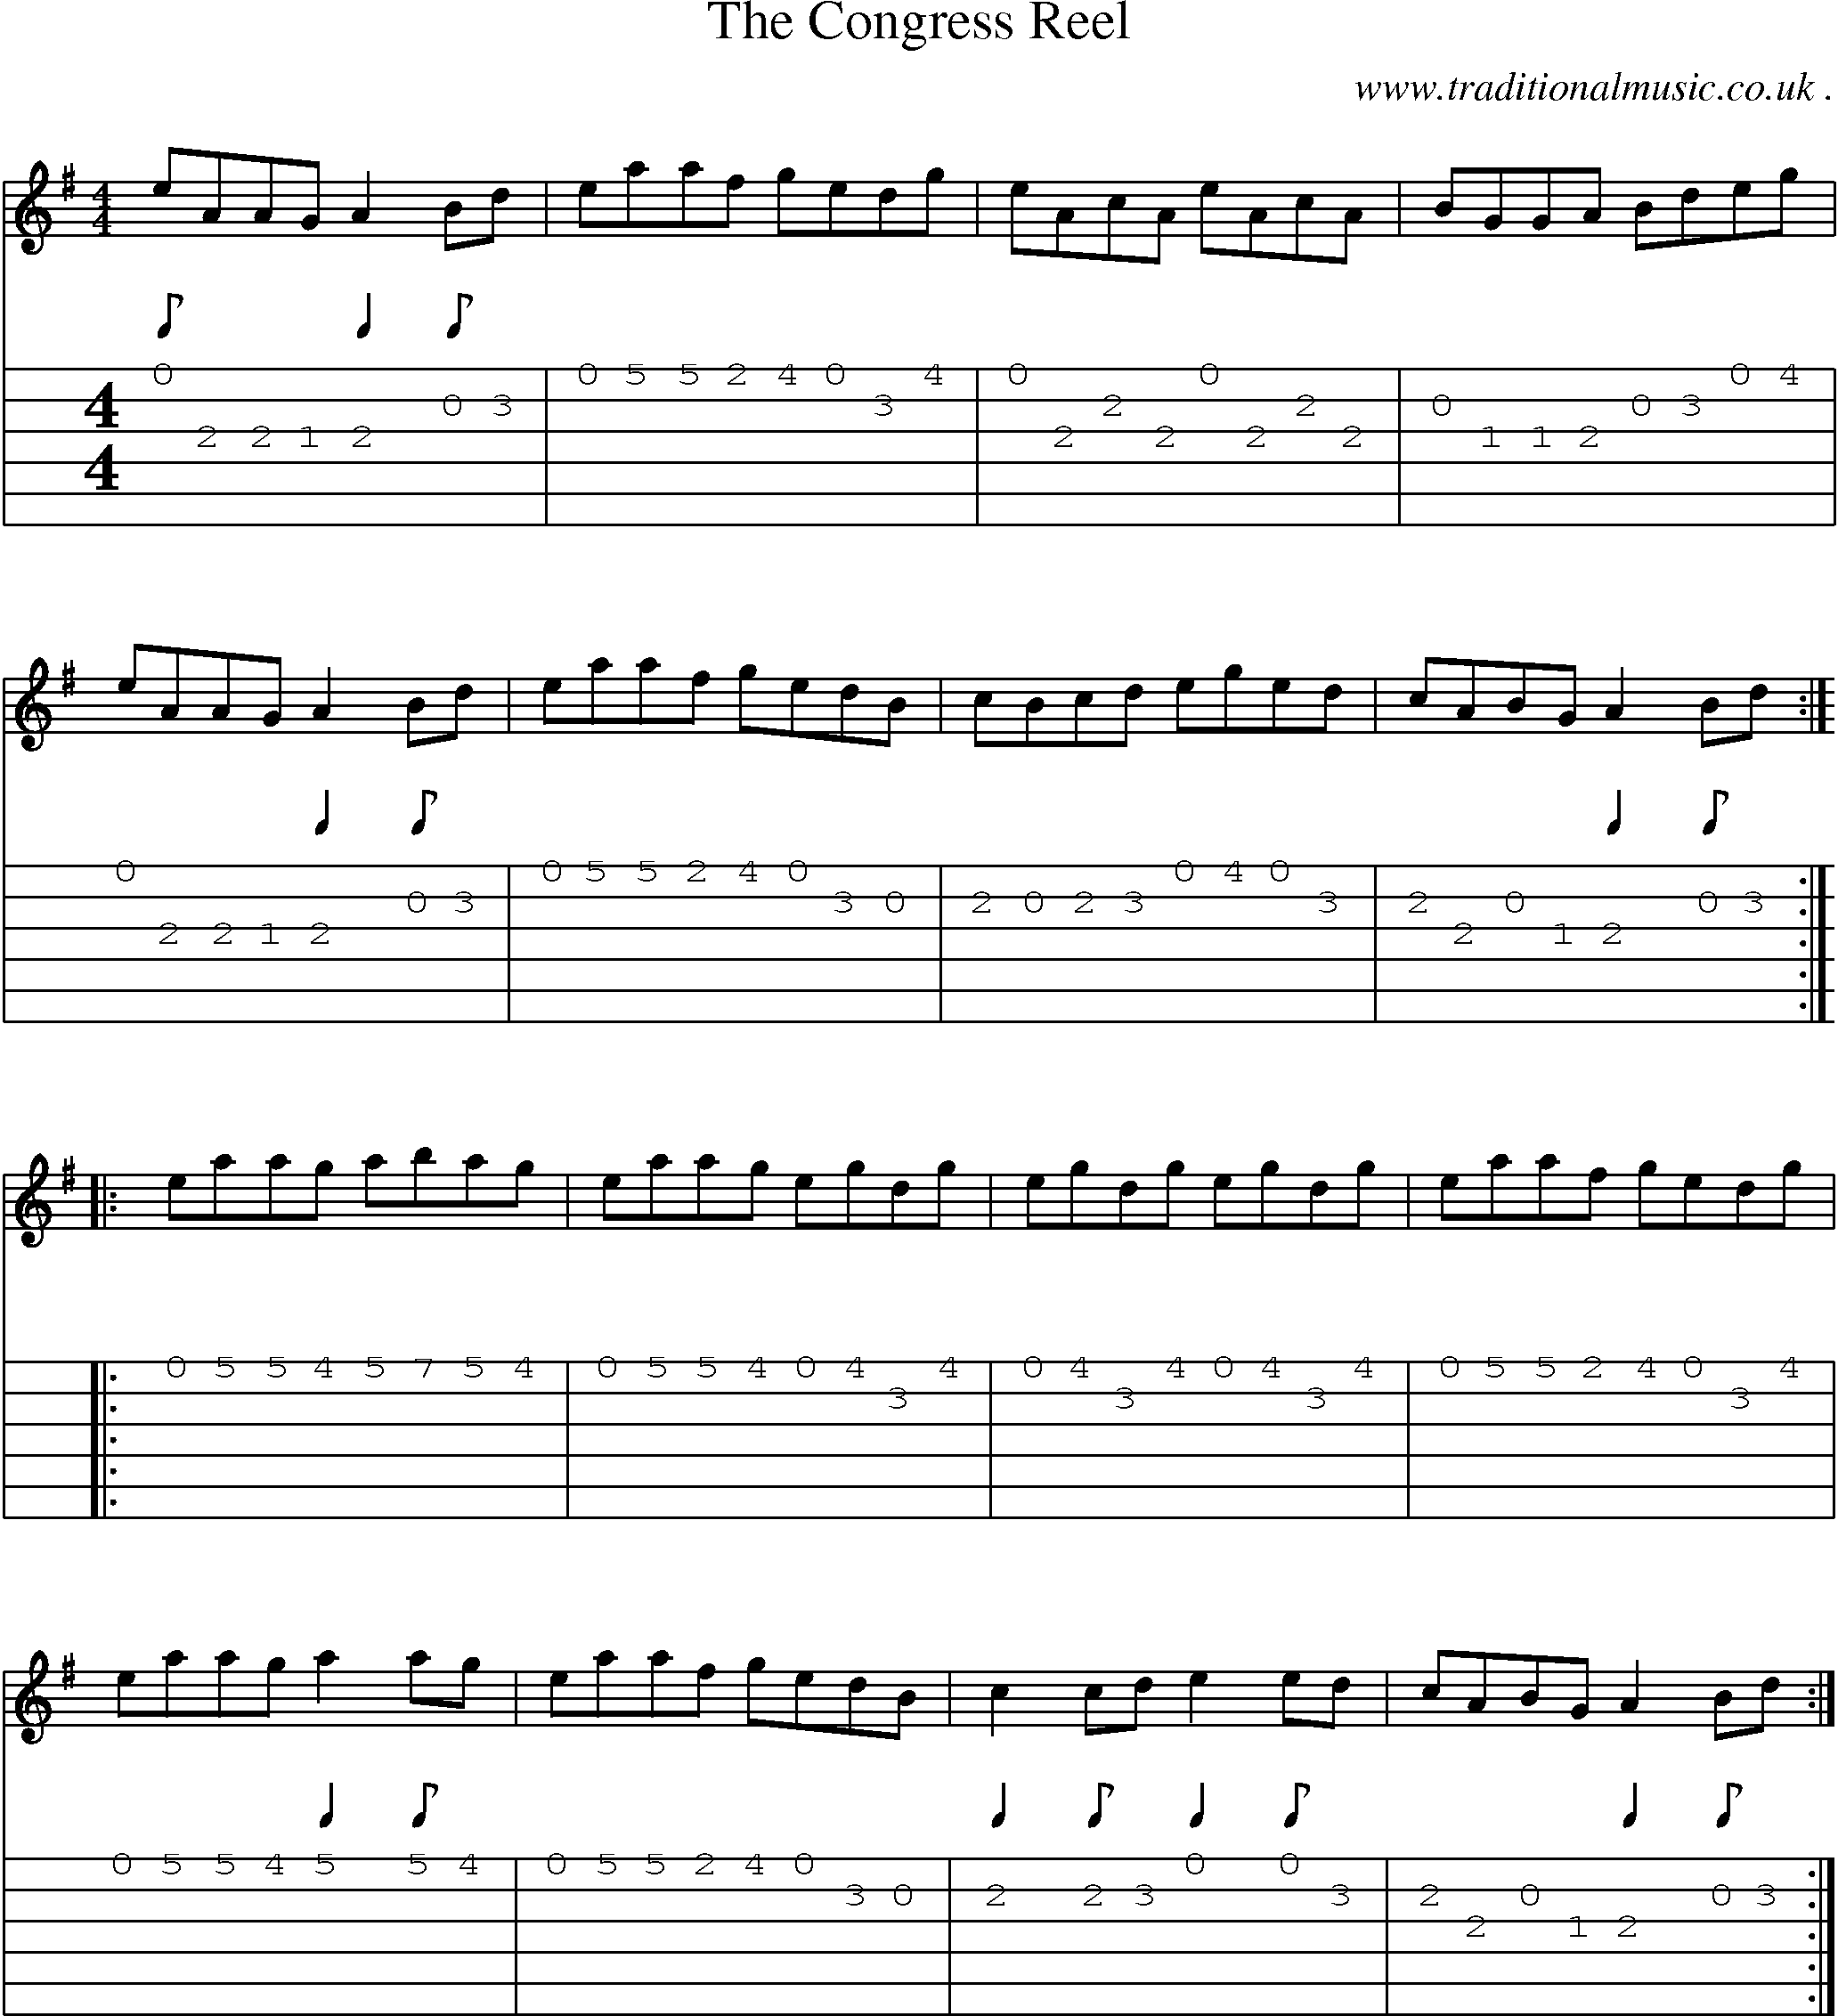 Sheet-Music and Guitar Tabs for The Congress Reel